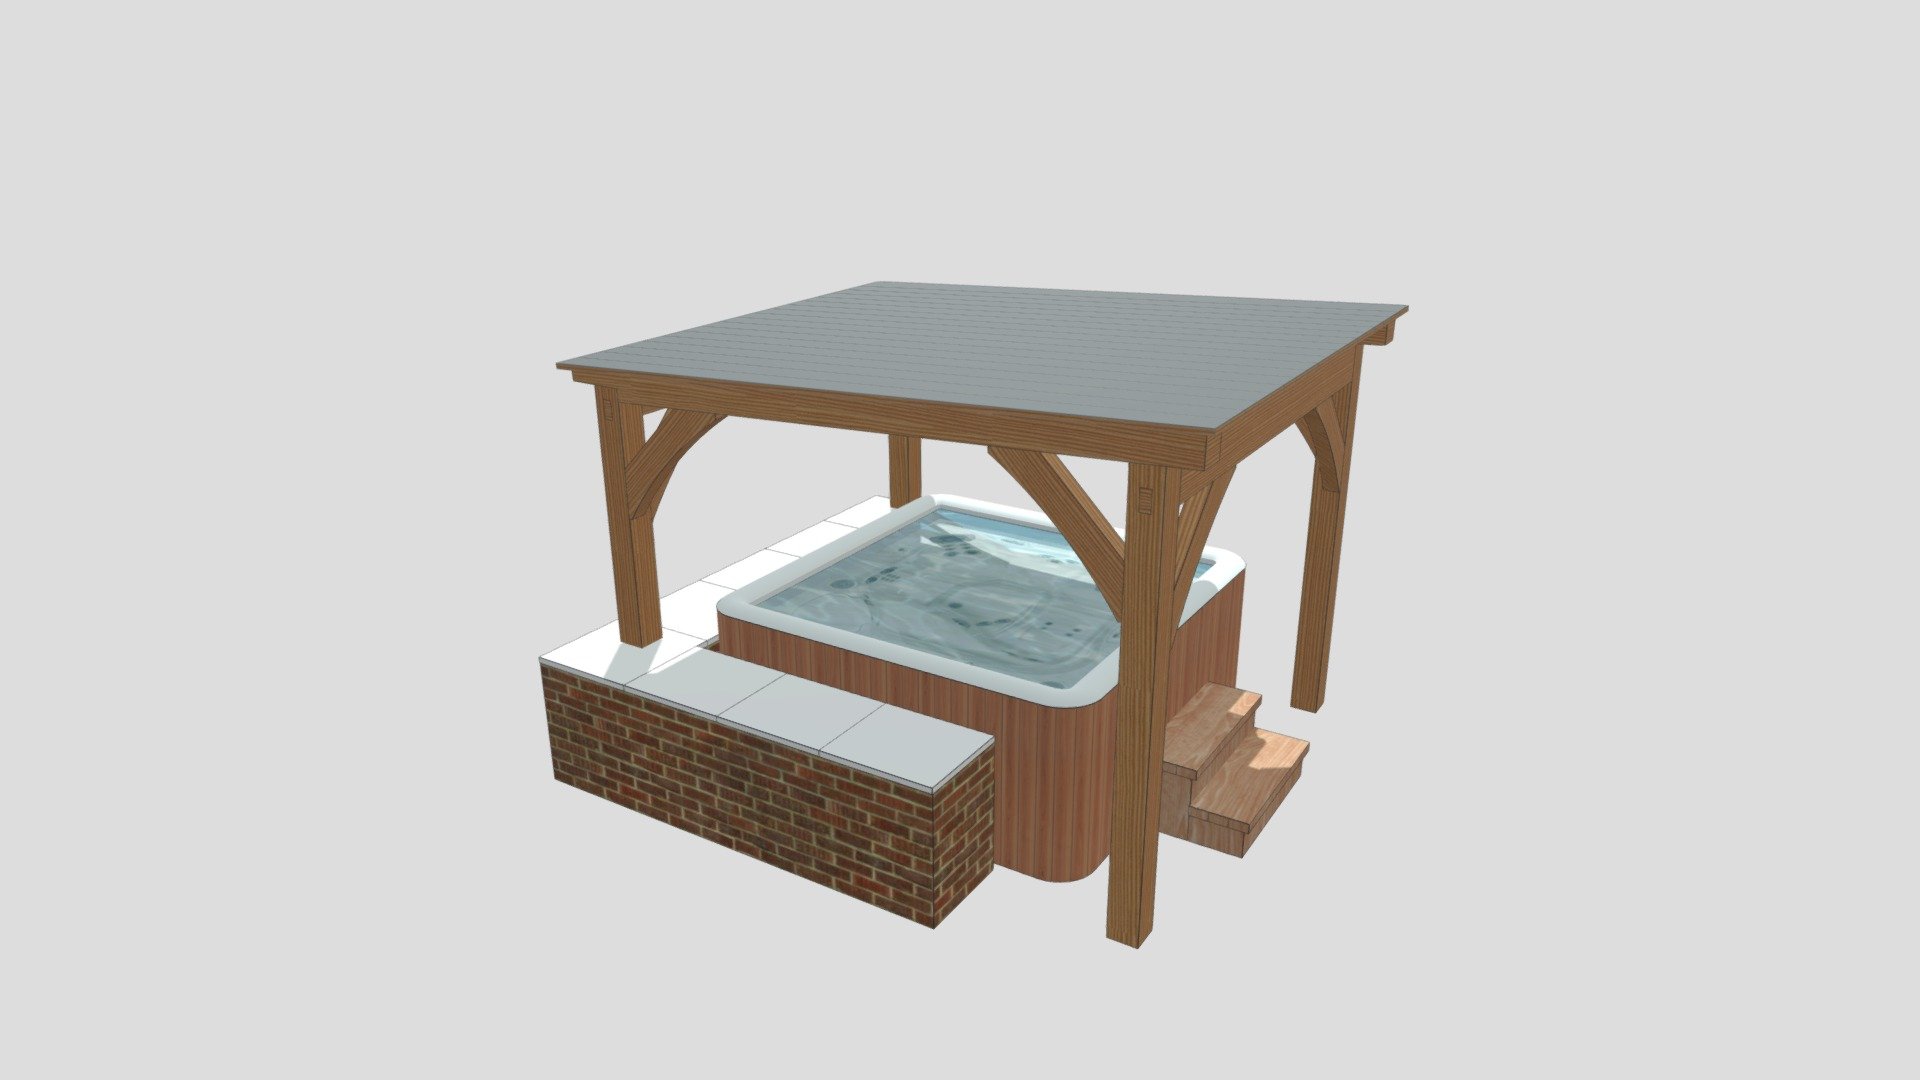 Hot tub enclosure - Diane Roth - 3D model by thomson.timber.co 3d model